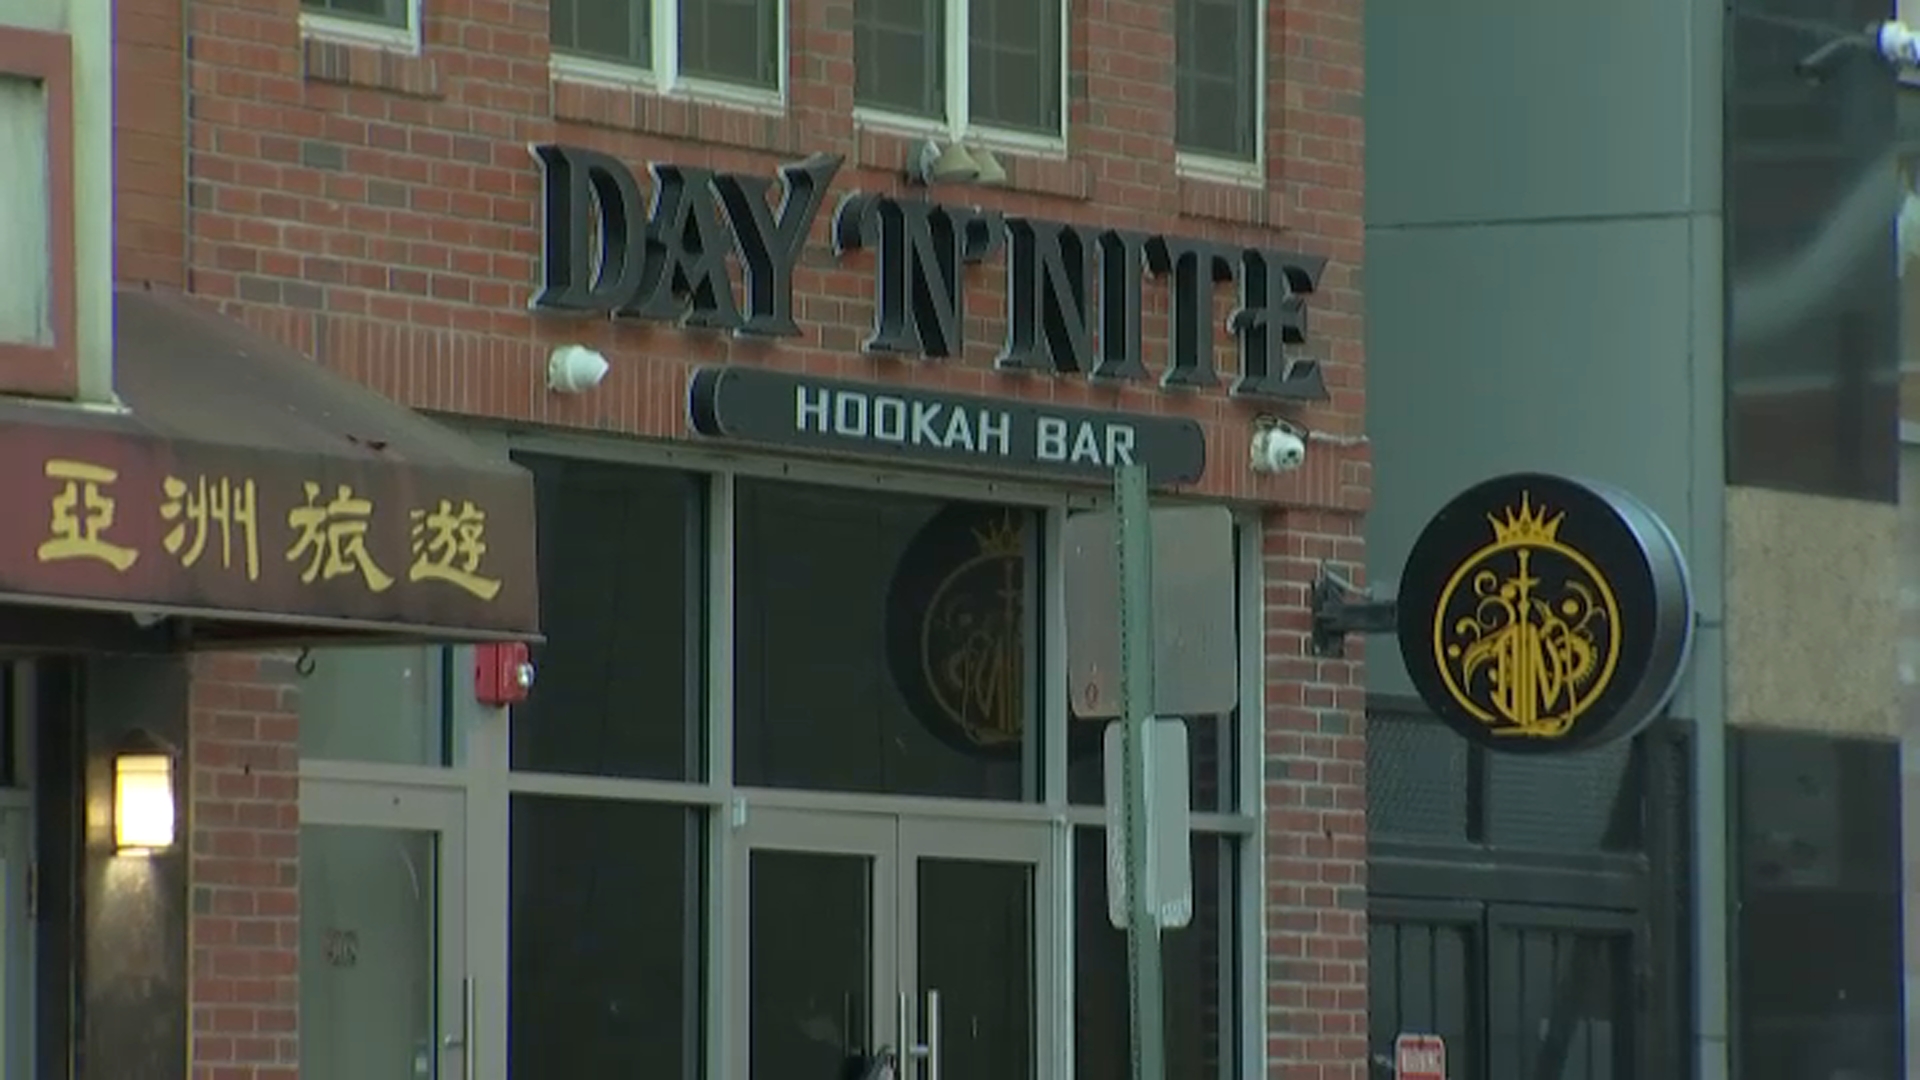 Shots Fired by Security Guard at Chinatown Hookah Bar